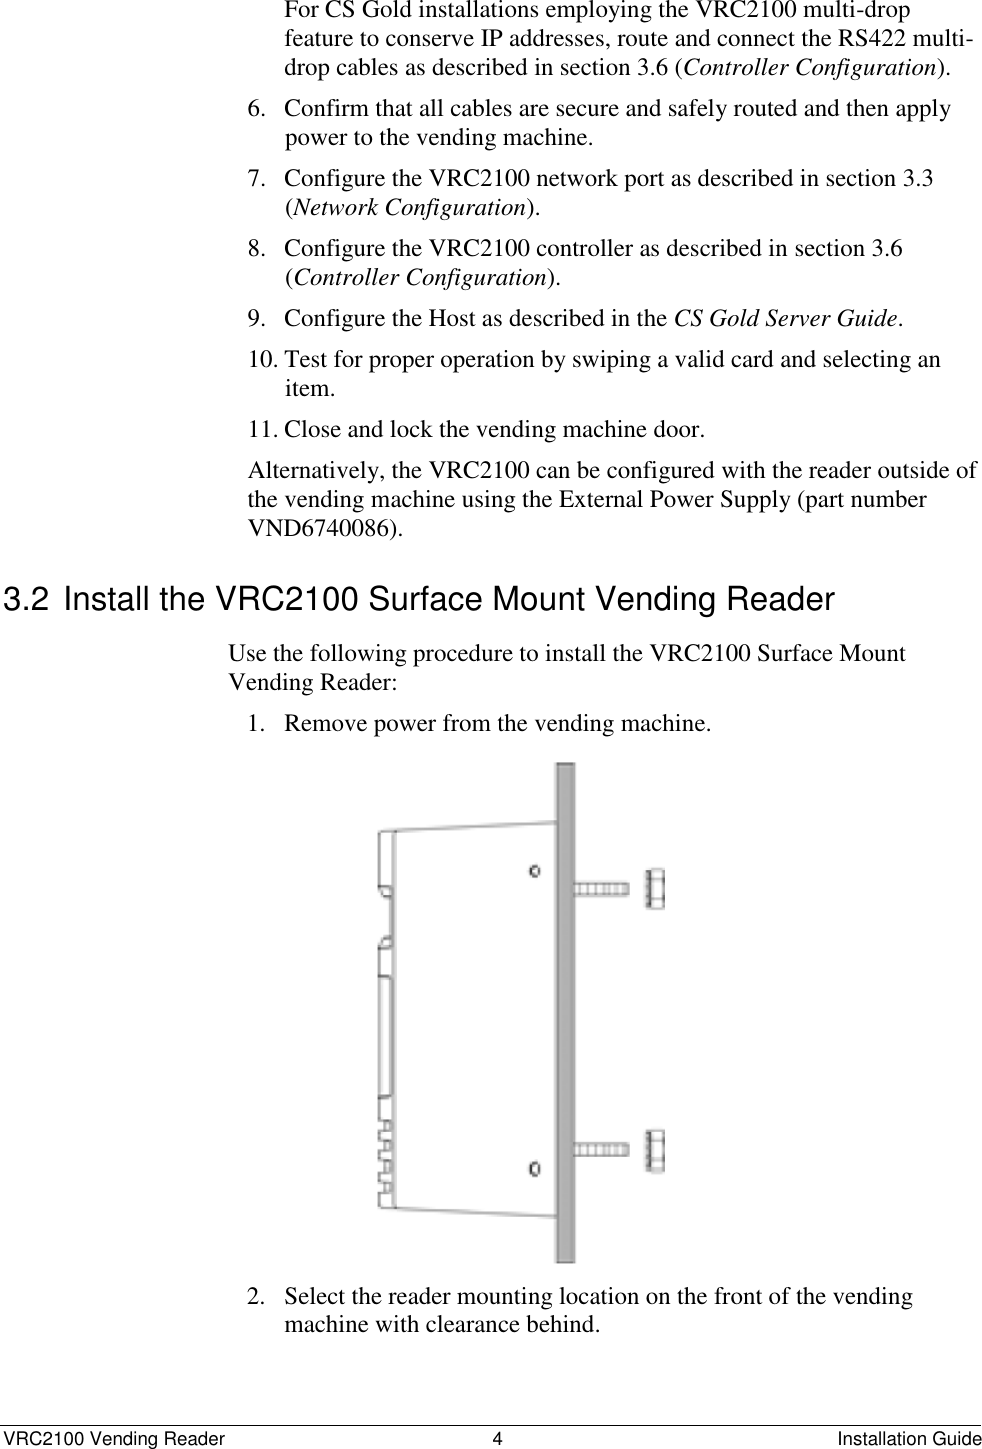  VRC2100 Vending Reader  4  Installation Guide For CS Gold installations employing the VRC2100 multi-drop feature to conserve IP addresses, route and connect the RS422 multi-drop cables as described in section 3.6 (Controller Configuration). 6. Confirm that all cables are secure and safely routed and then apply power to the vending machine. 7. Configure the VRC2100 network port as described in section 3.3 (Network Configuration). 8. Configure the VRC2100 controller as described in section 3.6 (Controller Configuration). 9. Configure the Host as described in the CS Gold Server Guide. 10. Test for proper operation by swiping a valid card and selecting an item. 11. Close and lock the vending machine door. Alternatively, the VRC2100 can be configured with the reader outside of the vending machine using the External Power Supply (part number VND6740086). 3.2 Install the VRC2100 Surface Mount Vending Reader Use the following procedure to install the VRC2100 Surface Mount Vending Reader:  1. Remove power from the vending machine.                 2. Select the reader mounting location on the front of the vending machine with clearance behind.  